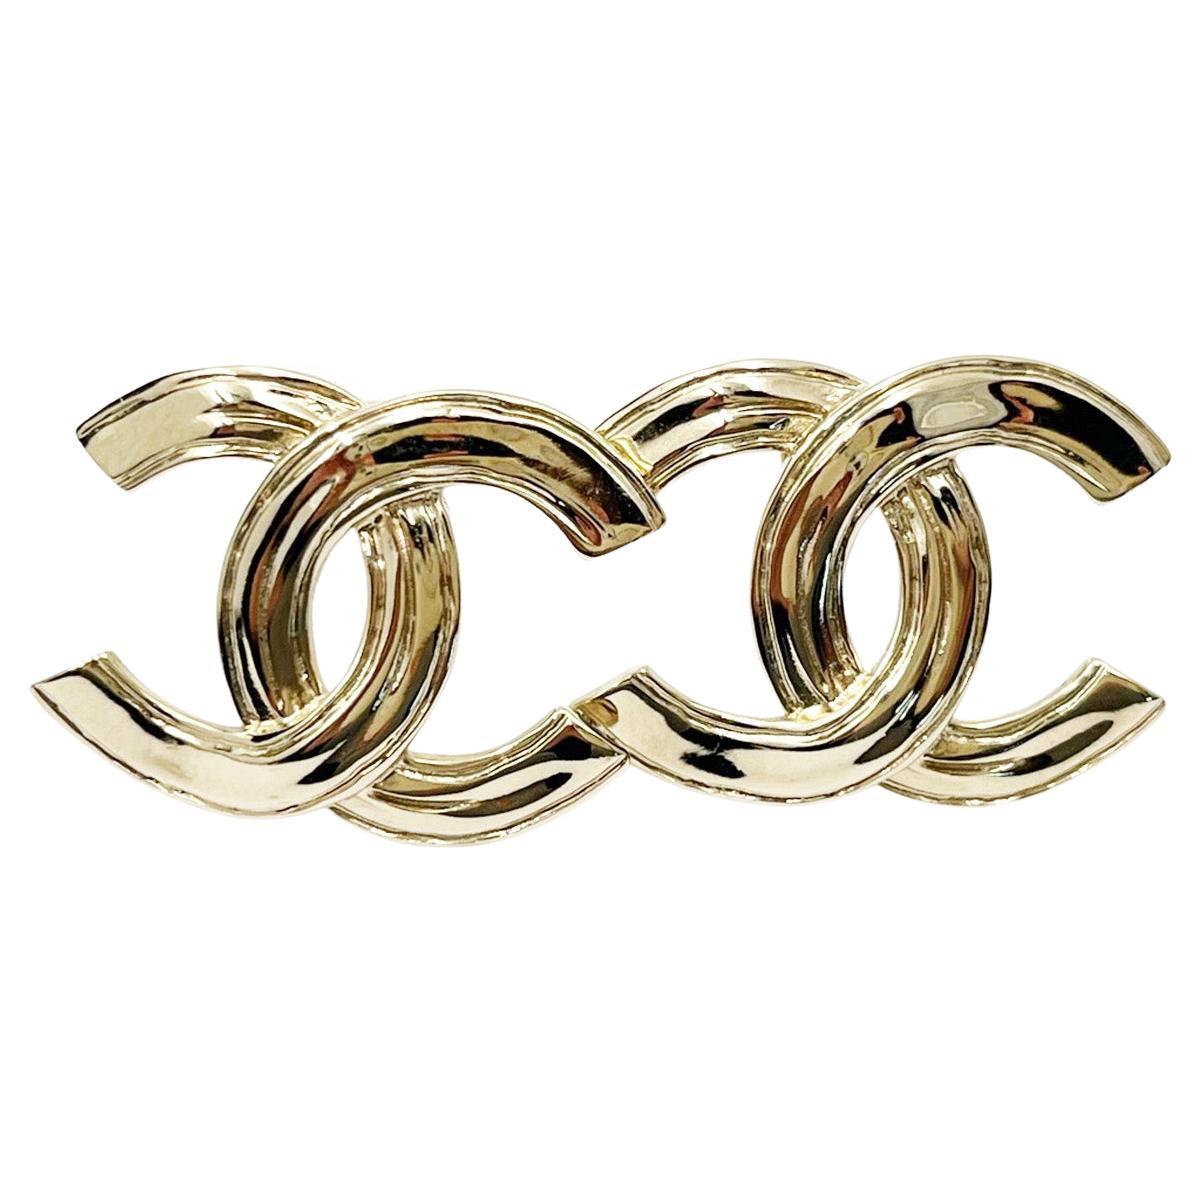 Chanel Brand New Light Gold Textured CC Large Piercing Earrings